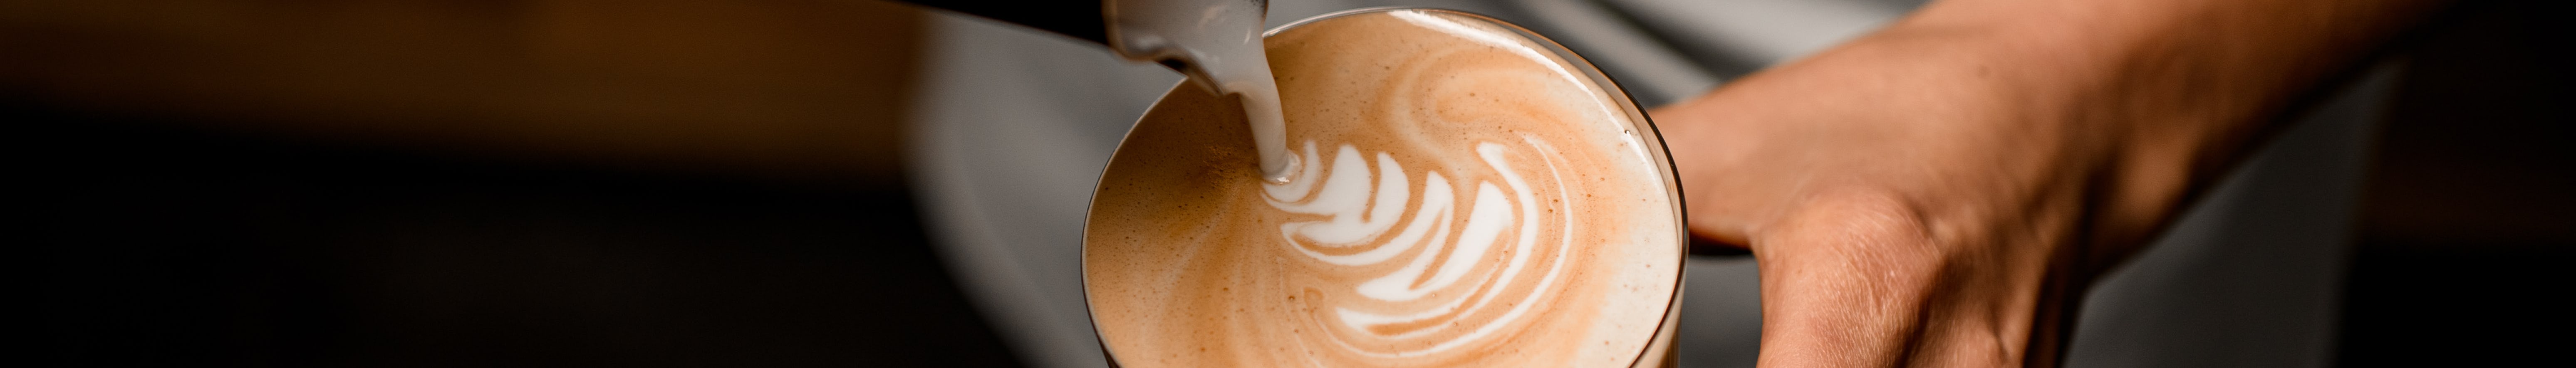 A person is pouring cream onto a cup of coffee, making coffee art.